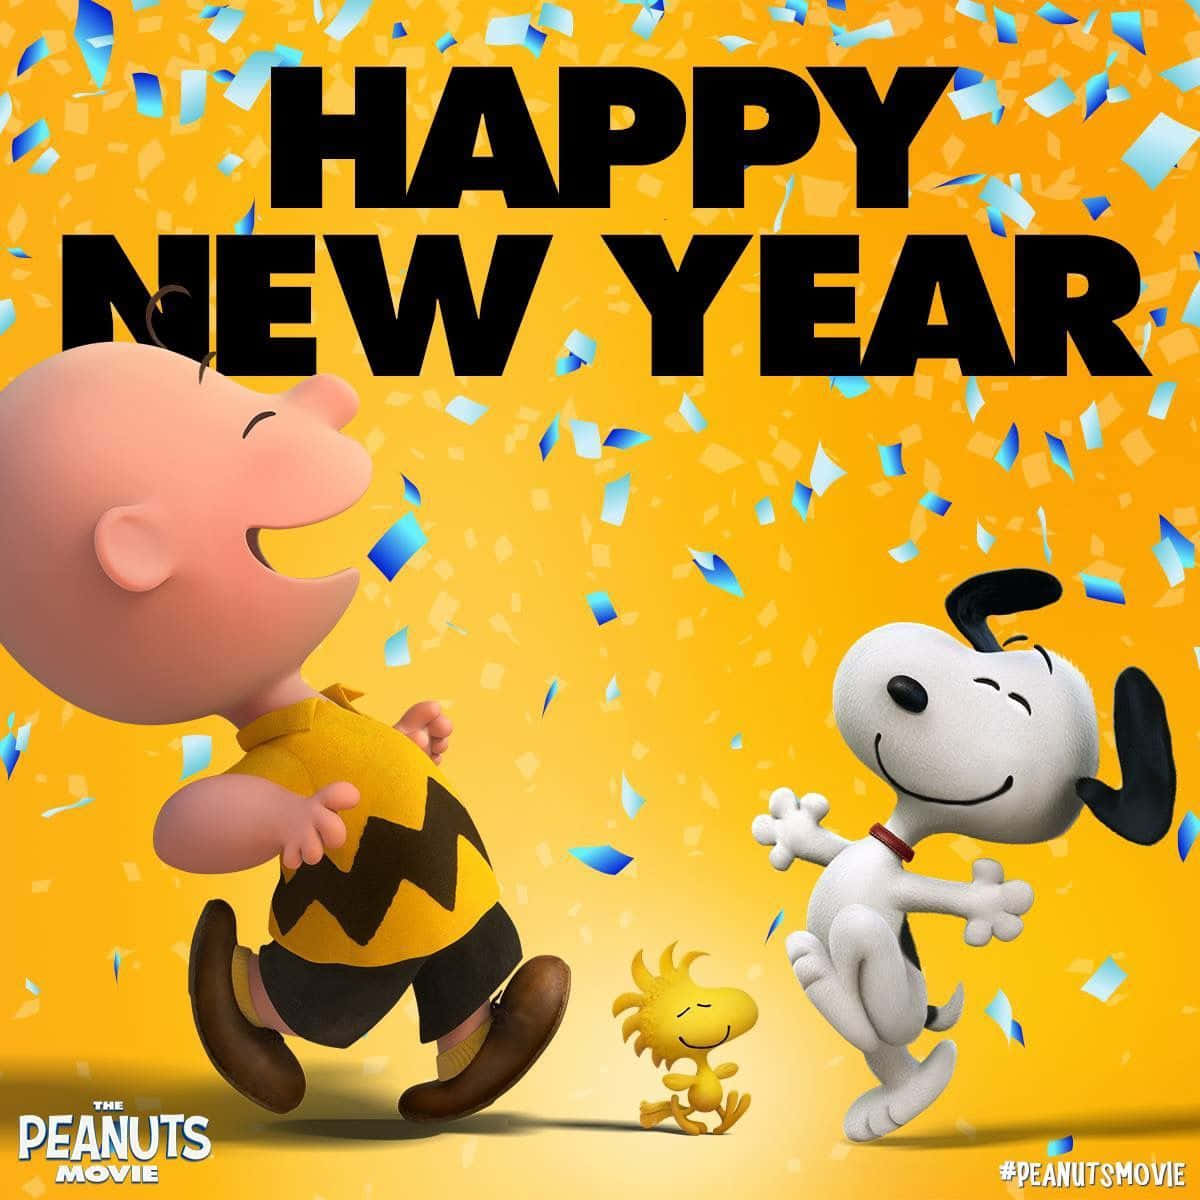 Happy Charlie Brown New Year Wallpaper